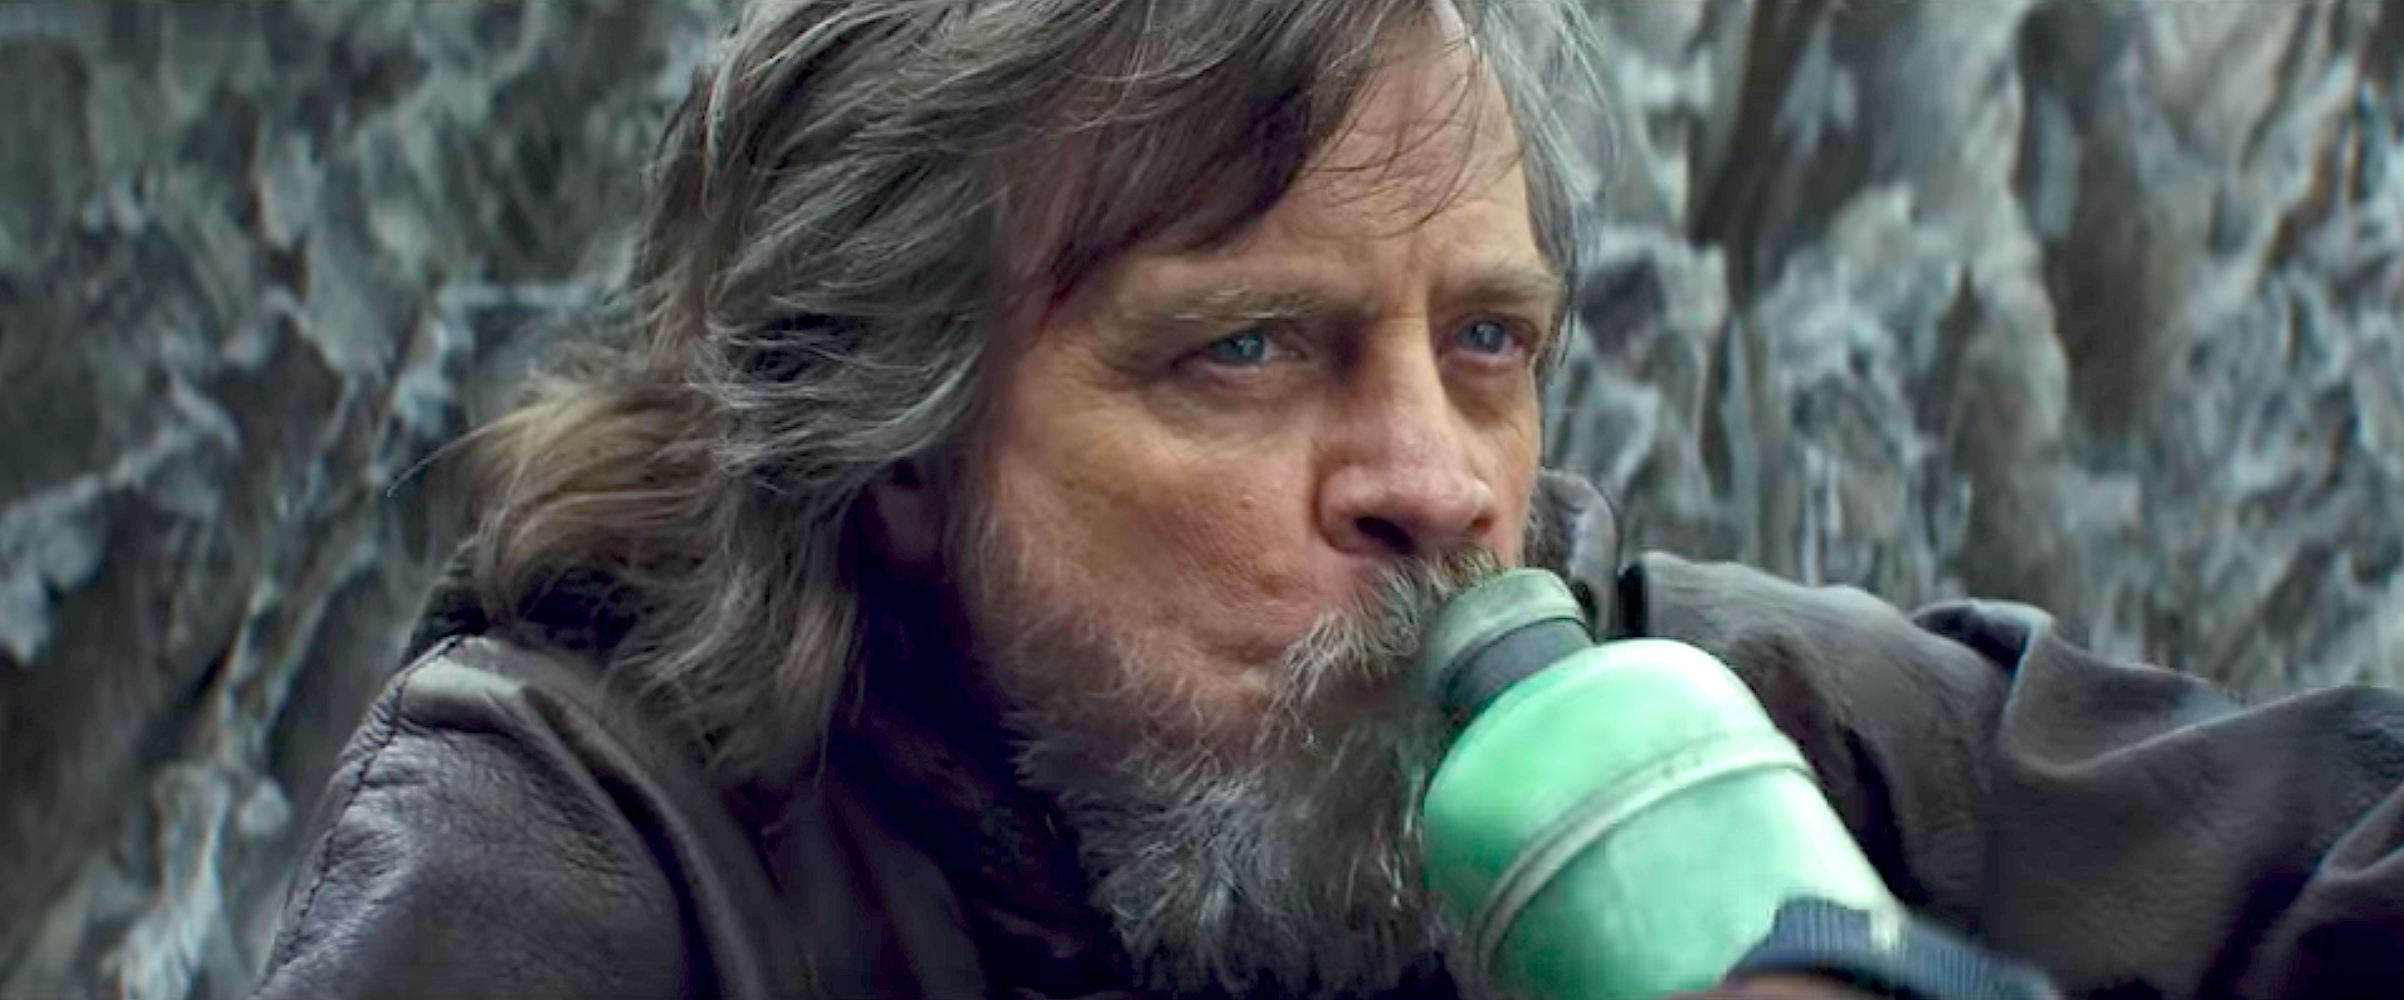 Mark Hamill as Luke Skywalker in one of 'The Last Jedi's' (2017) most notorious and controversial scenes